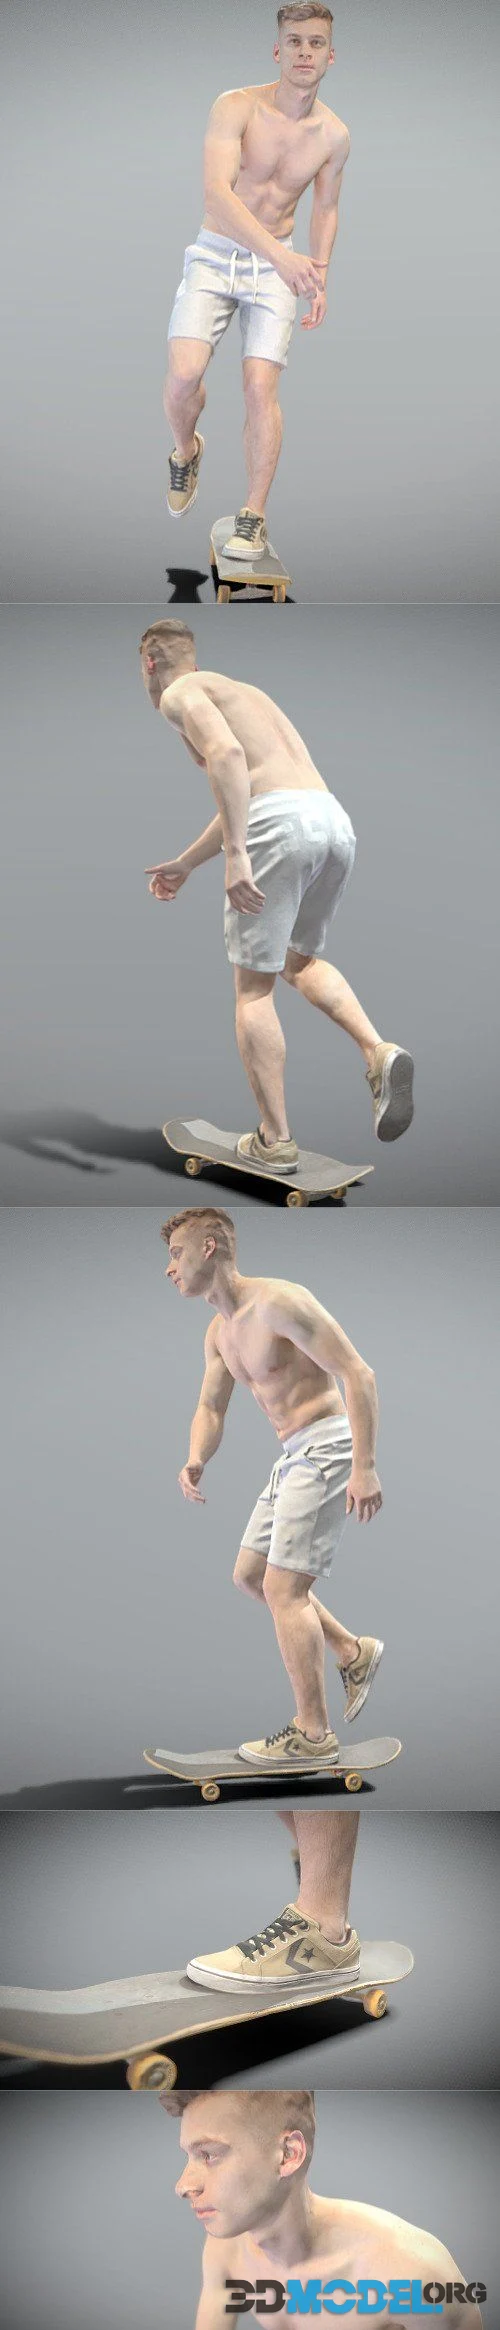 Athletic young man riding a skateboard 169 (PBR)